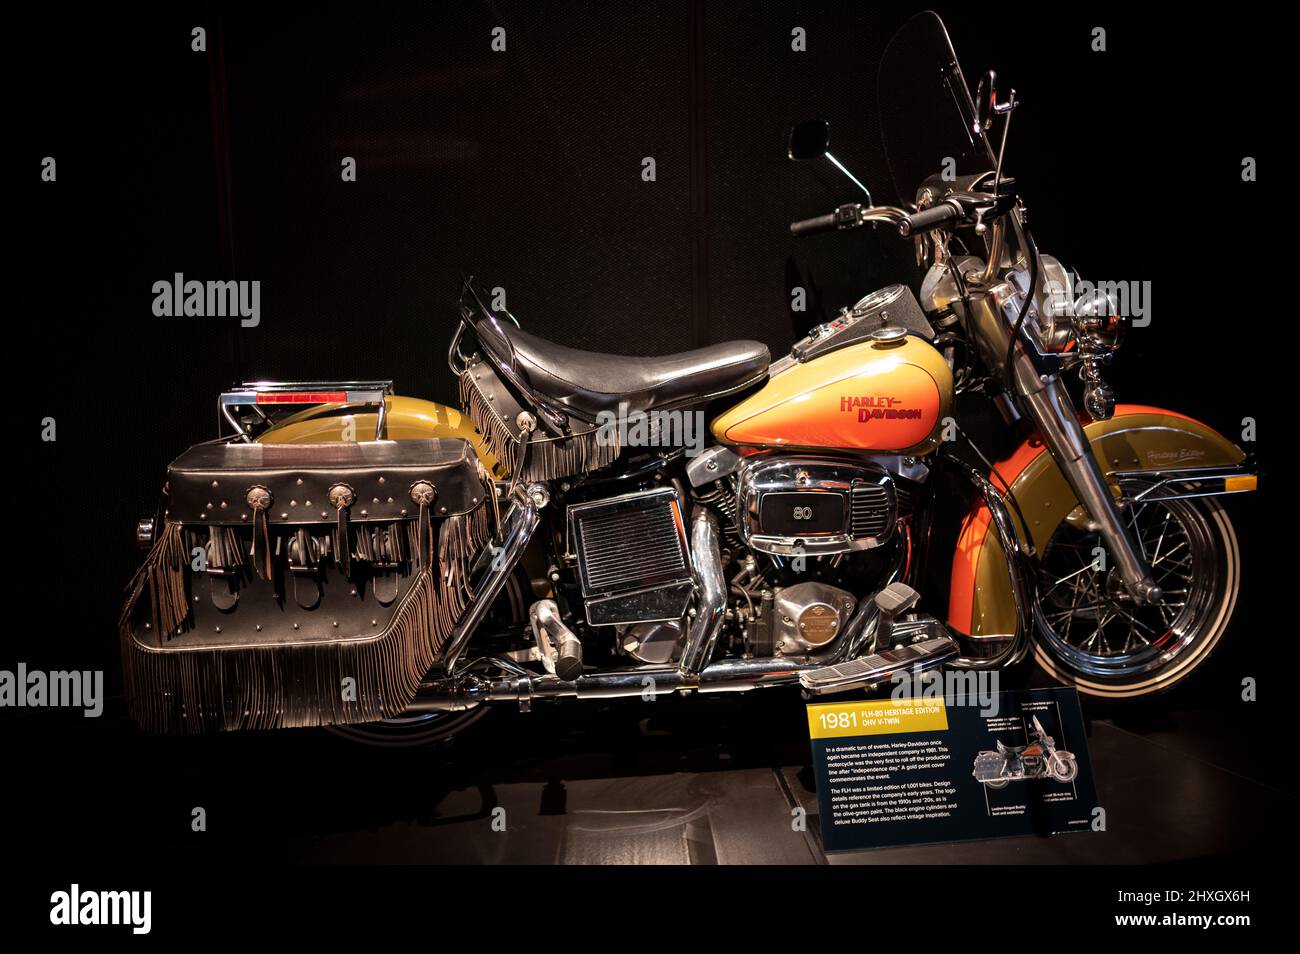 1981 heritage editoin Harley-Davidson motorcyle located at the Harley-Davidson museum in Milwaukee, Wisconsin, USA Stock Photo